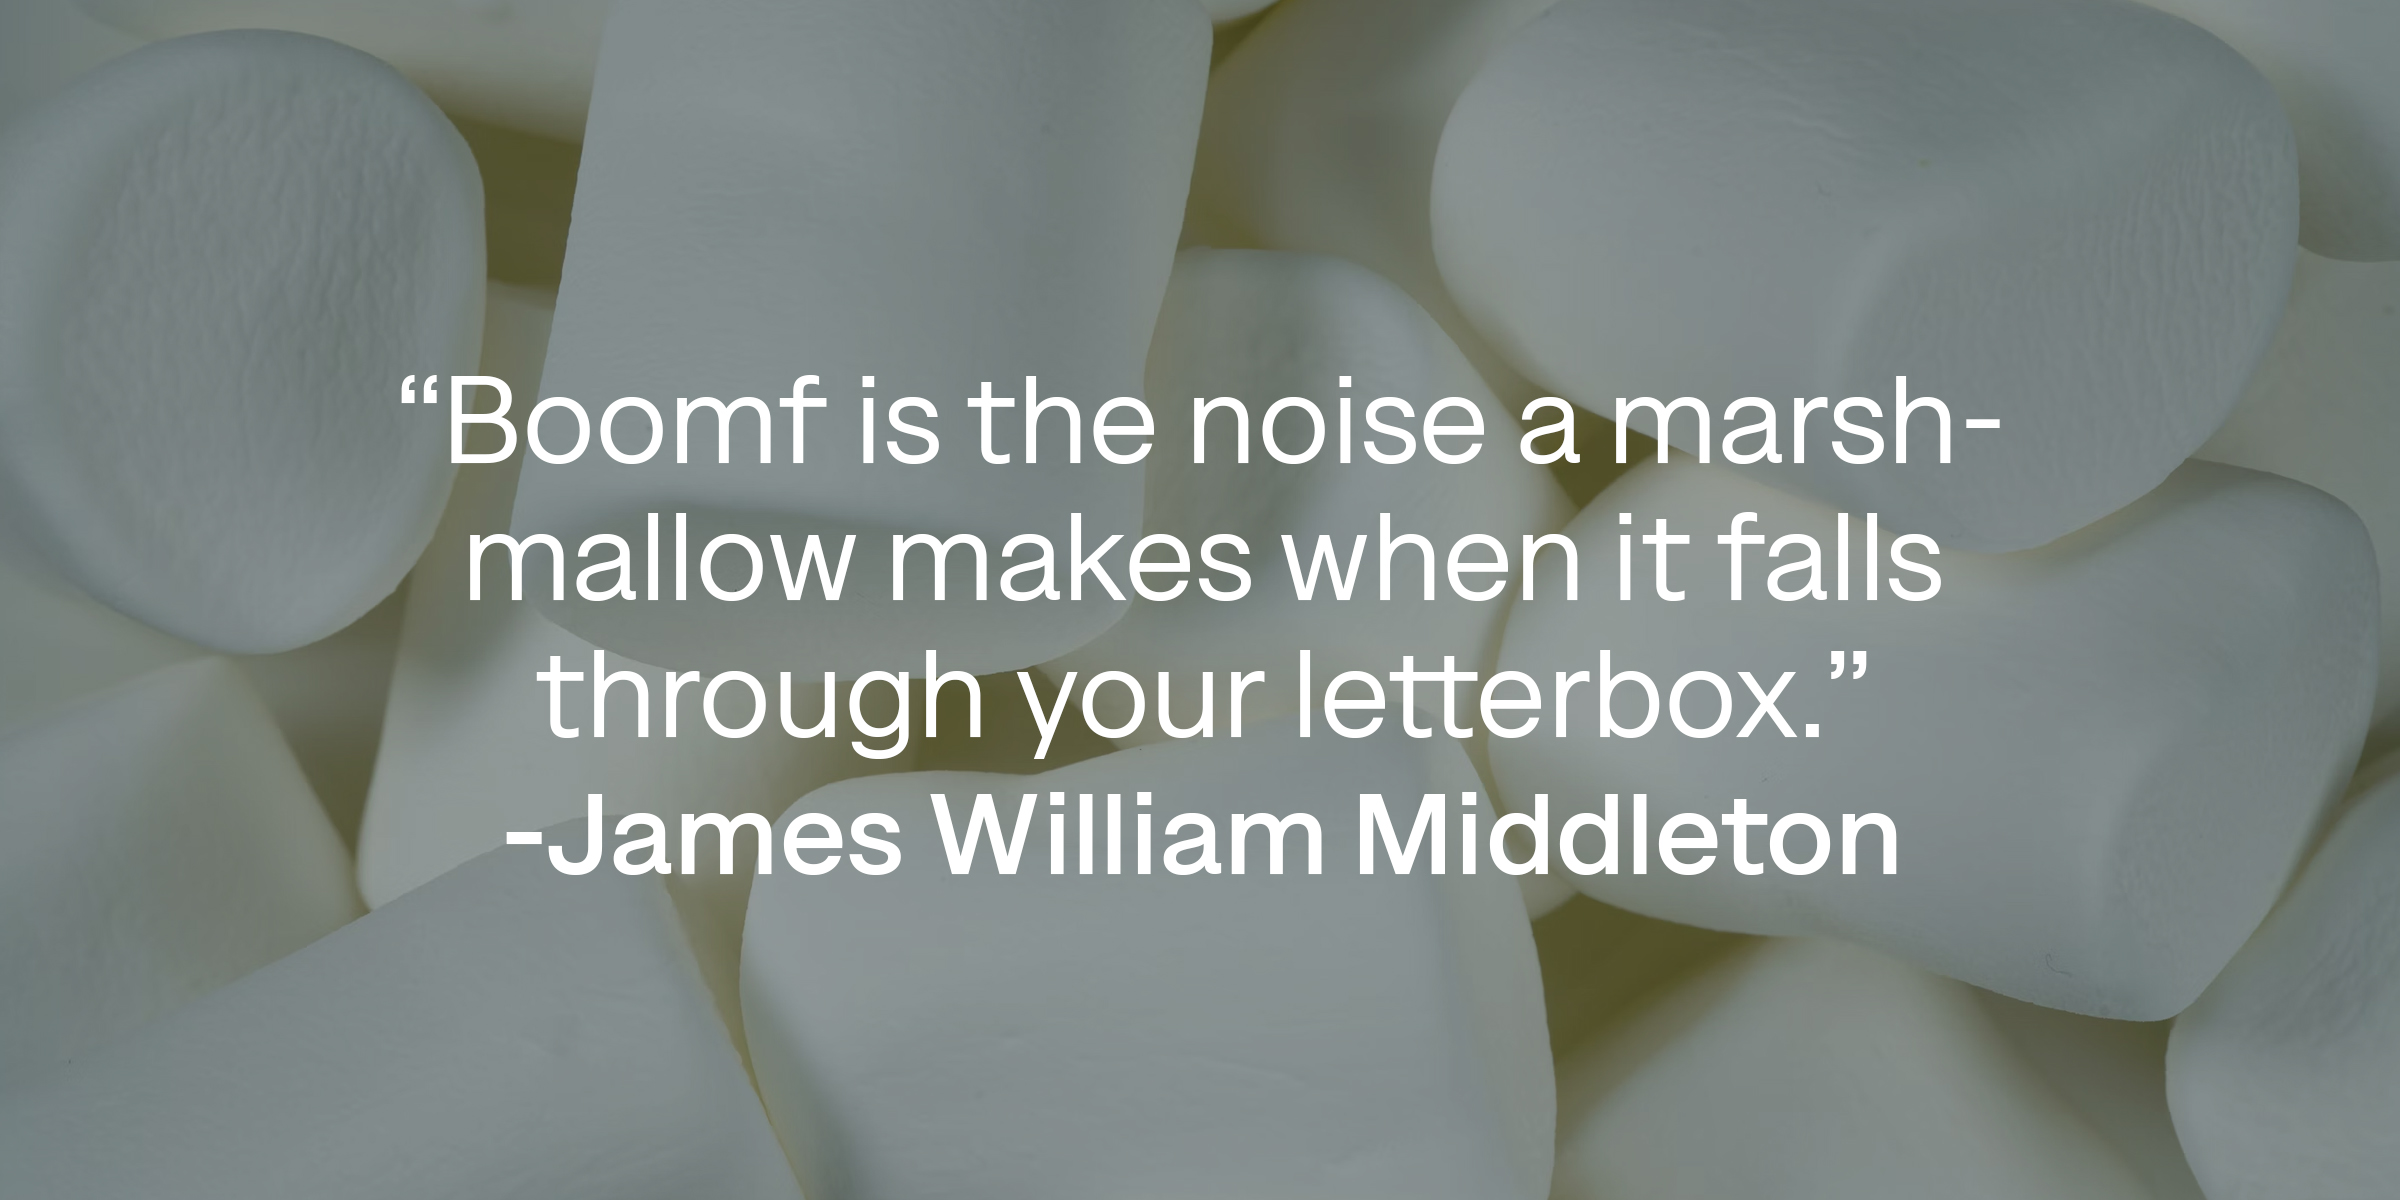 James William Middleton's quote: "Boomf is the noise a marshmallow makes when it falls through your letterbox." | Source: Shutterstock